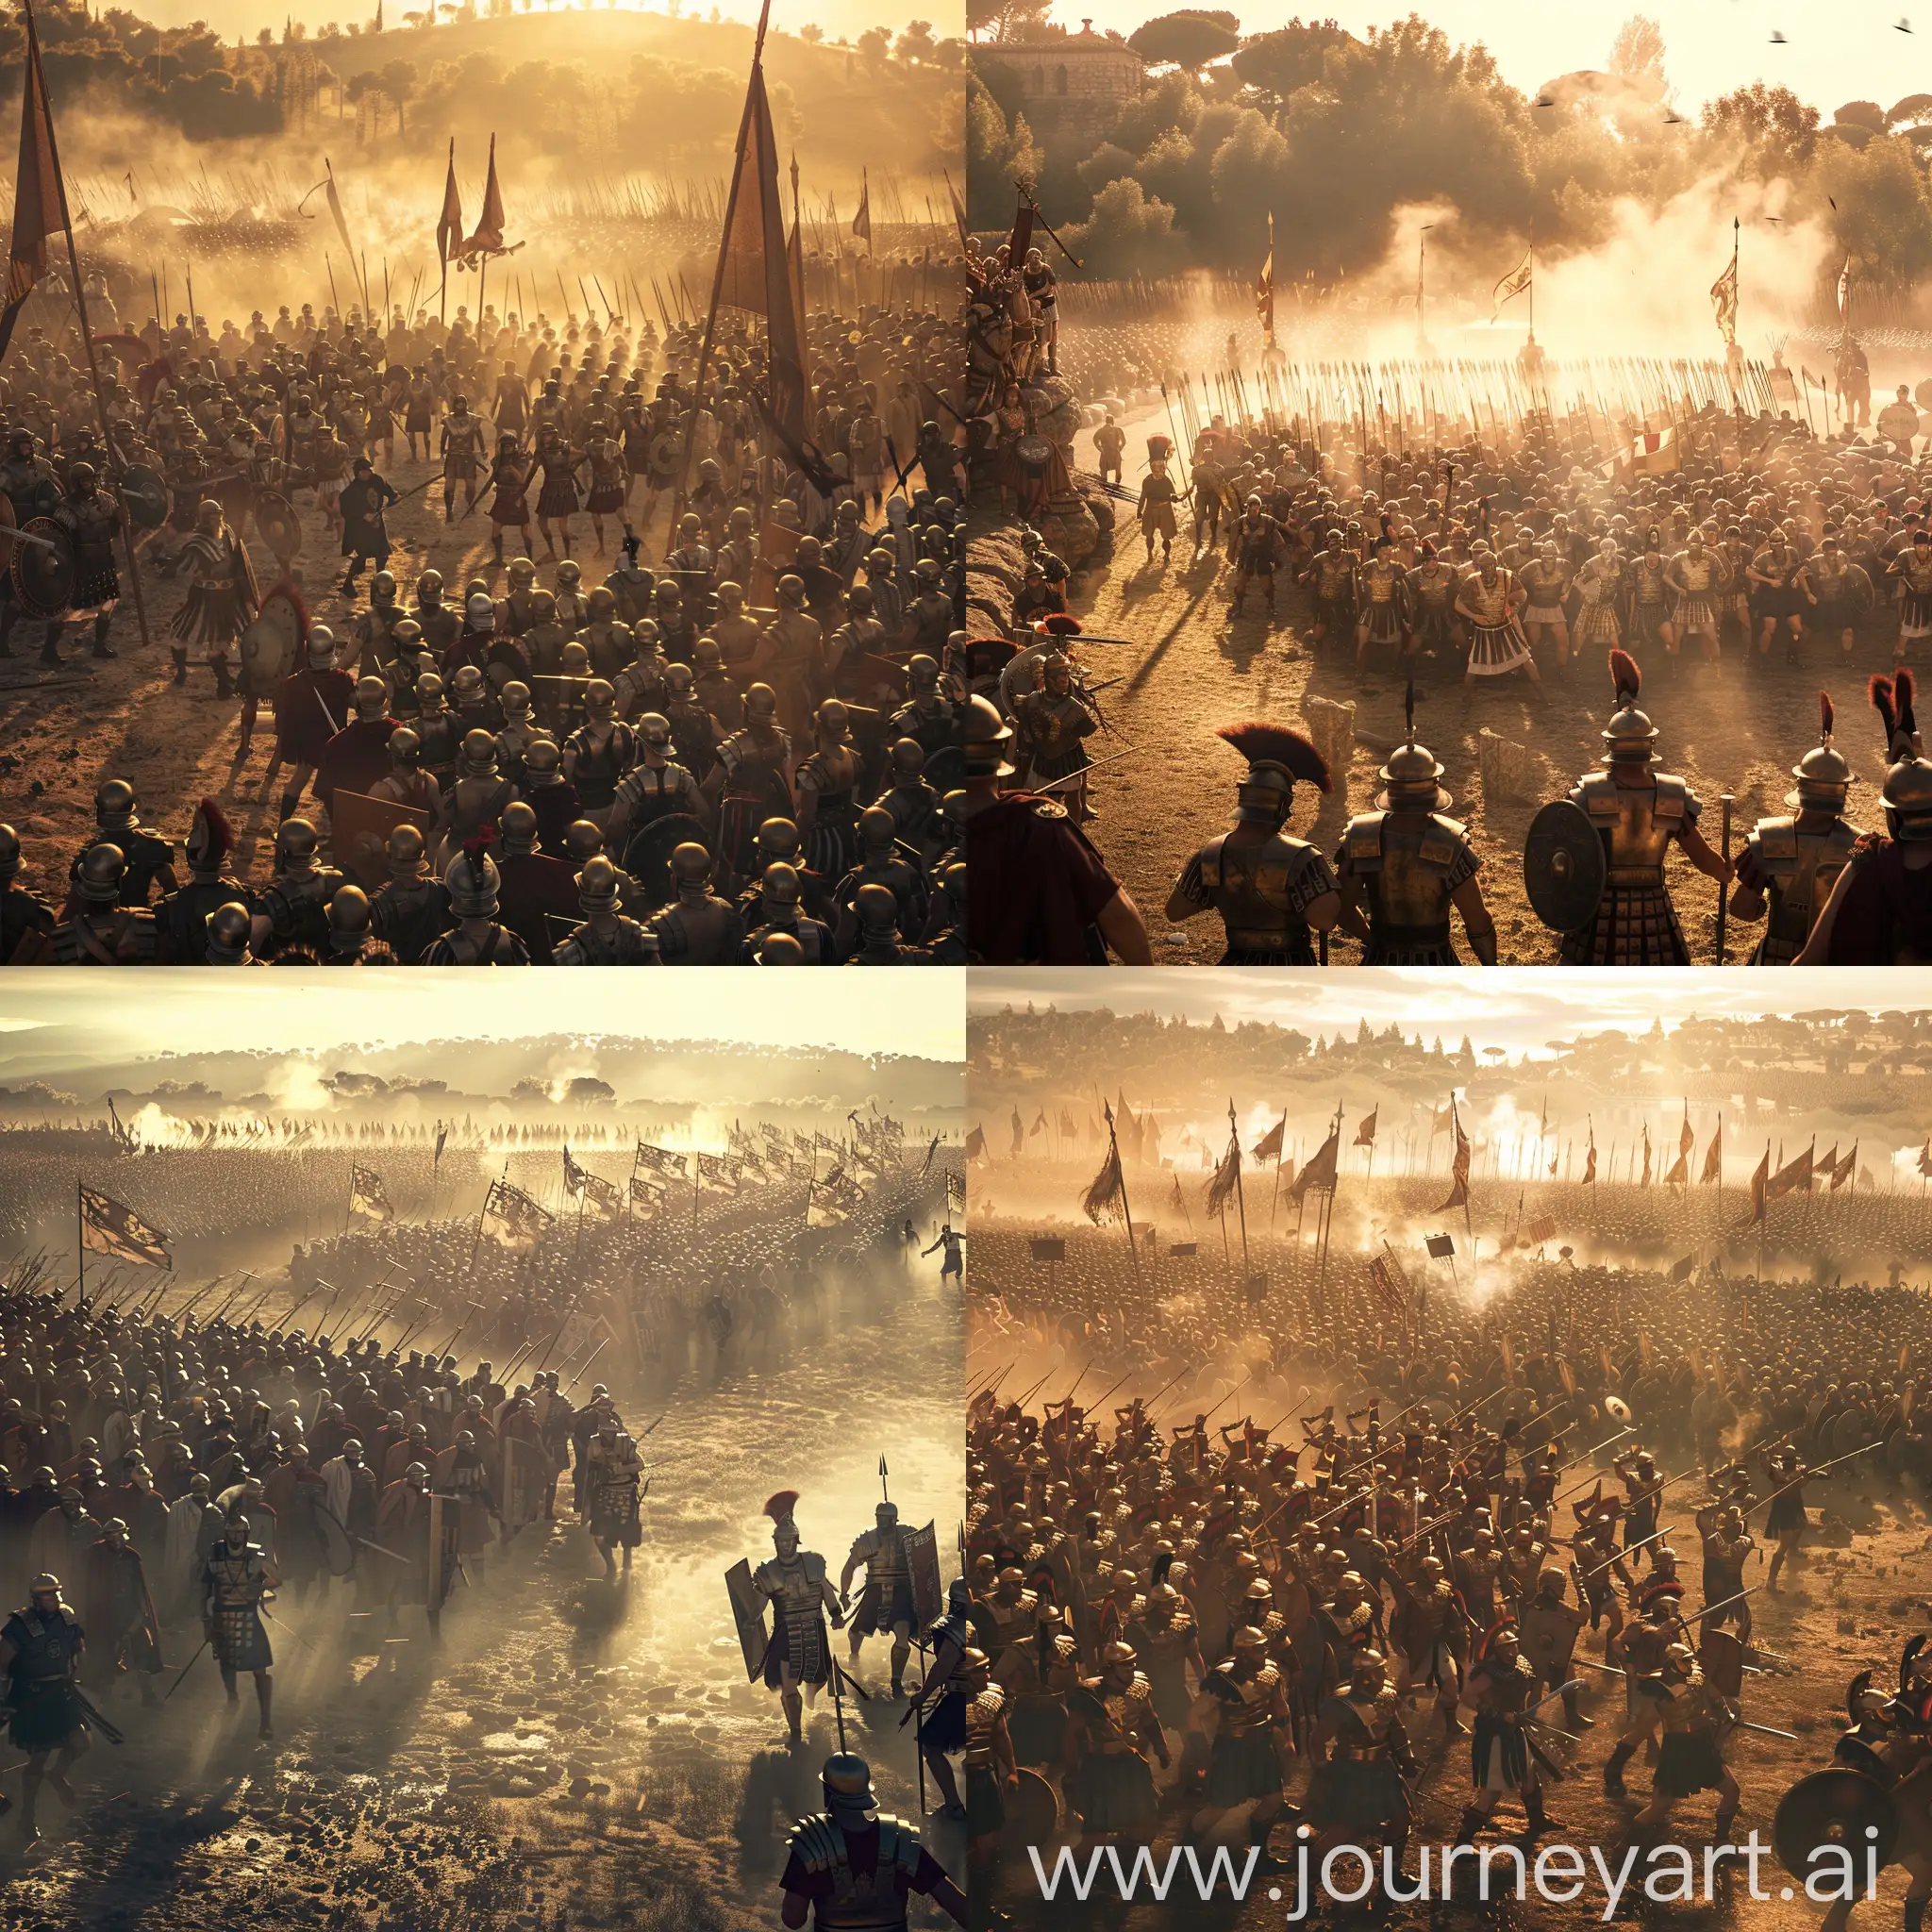 Roman battle scene, legions in tight formation facing a horde of barbarians, a sprawling battlefield under the harsh light of the afternoon sun, Style: Inspired by the dramatic and gritty realism of Gladiator combined with the epic scale of Rome (TV series), Additional Details: Roman soldiers clad in historically accurate armor, short swords glinting, barbarians wielding various weapons, banners fluttering, dust kicked up by the melee, Modifiers: Dynamic angles to capture the clash, emphasis on the contrast between the disciplined Roman formations and the chaotic barbarian charge.